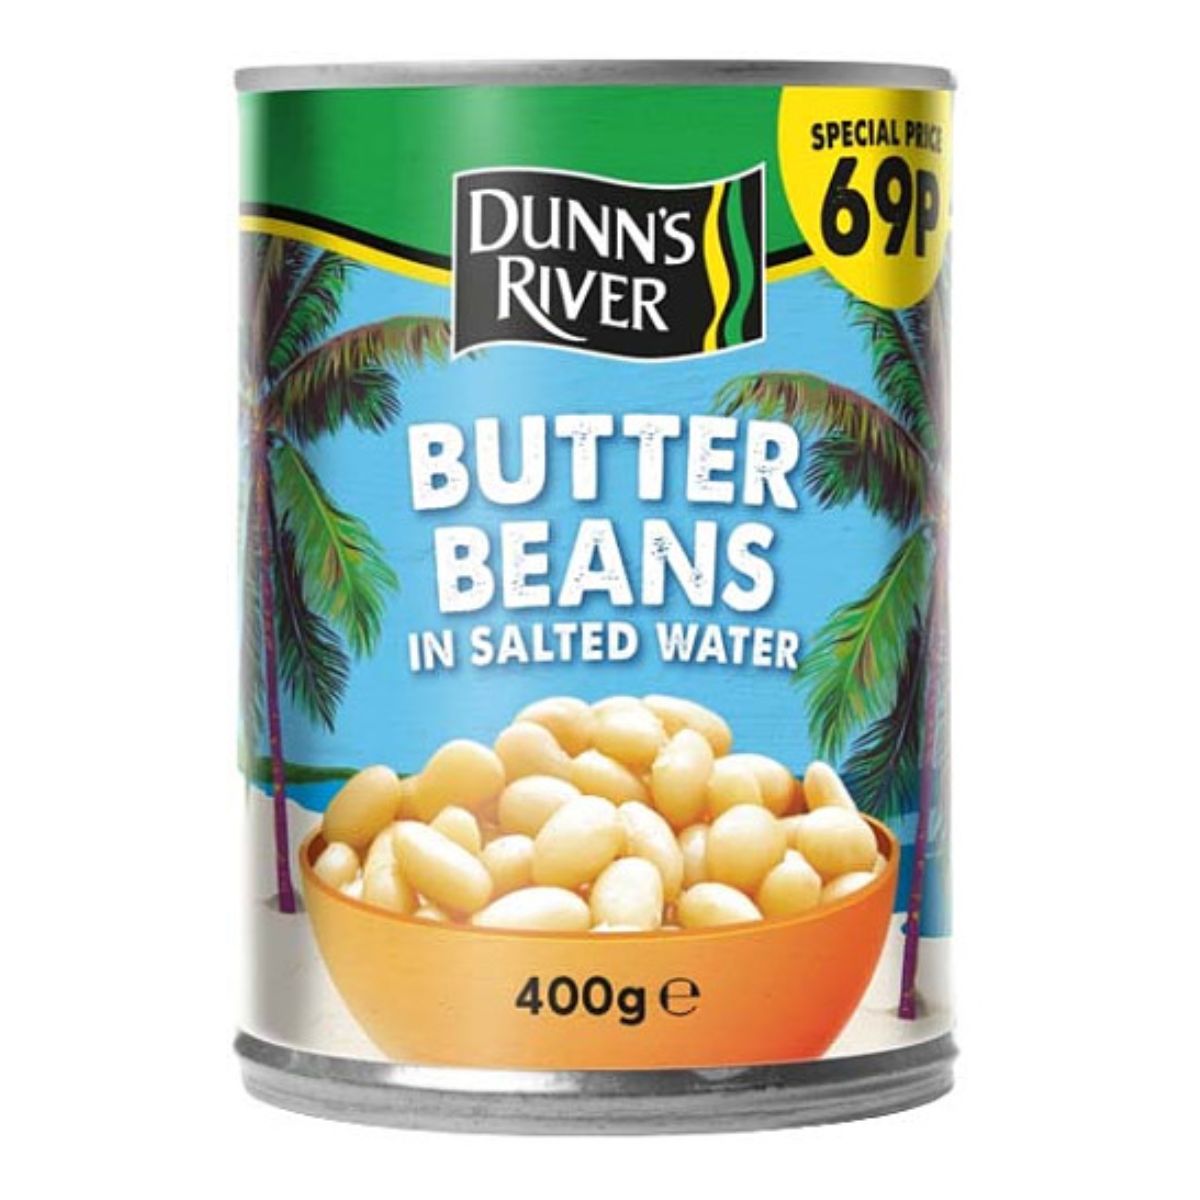 Dunns River - Butter Beans - 400g in salted water.